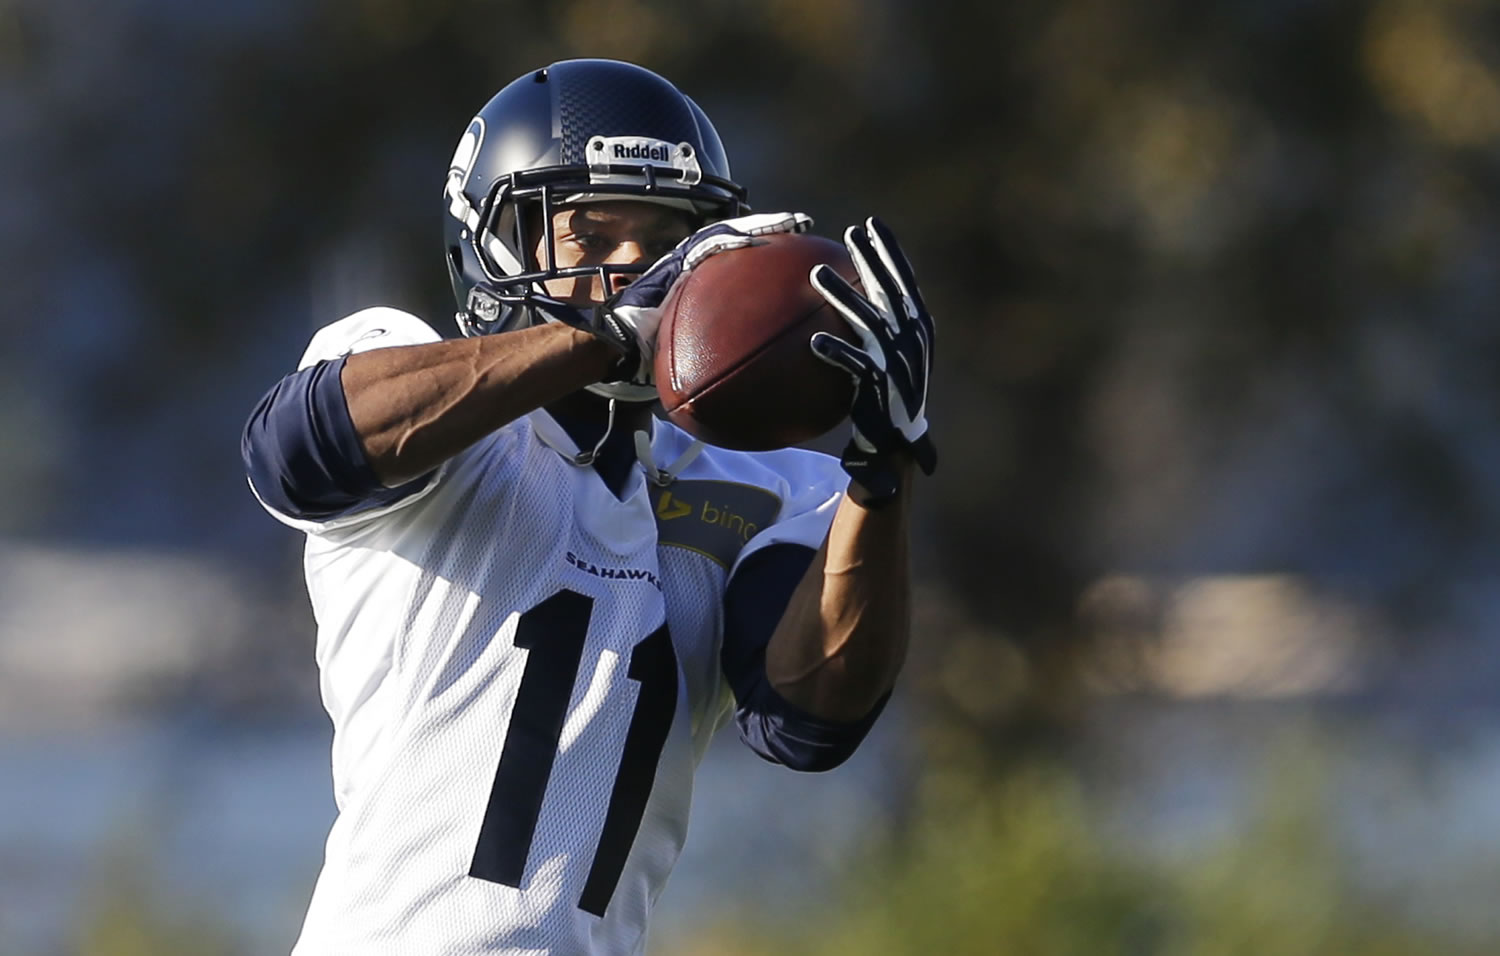 Seattle Seahawks wide receiver Percy Harvin makes a catch as he takes part in an NFL football practice, Tuesday, Oct. 22, 2013, in Renton, Wash. It was Harvin's first full team practice since he injured his hip during the off-season. (AP Photo/Ted S.